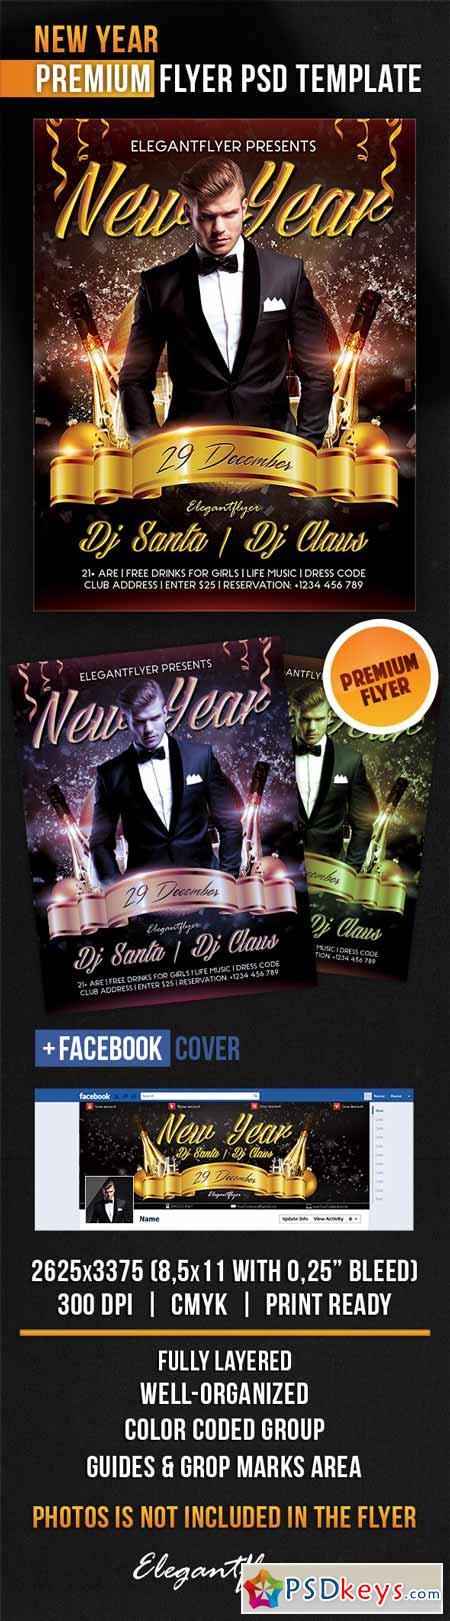 New Year  Flyer PSD Template + Facebook Cover